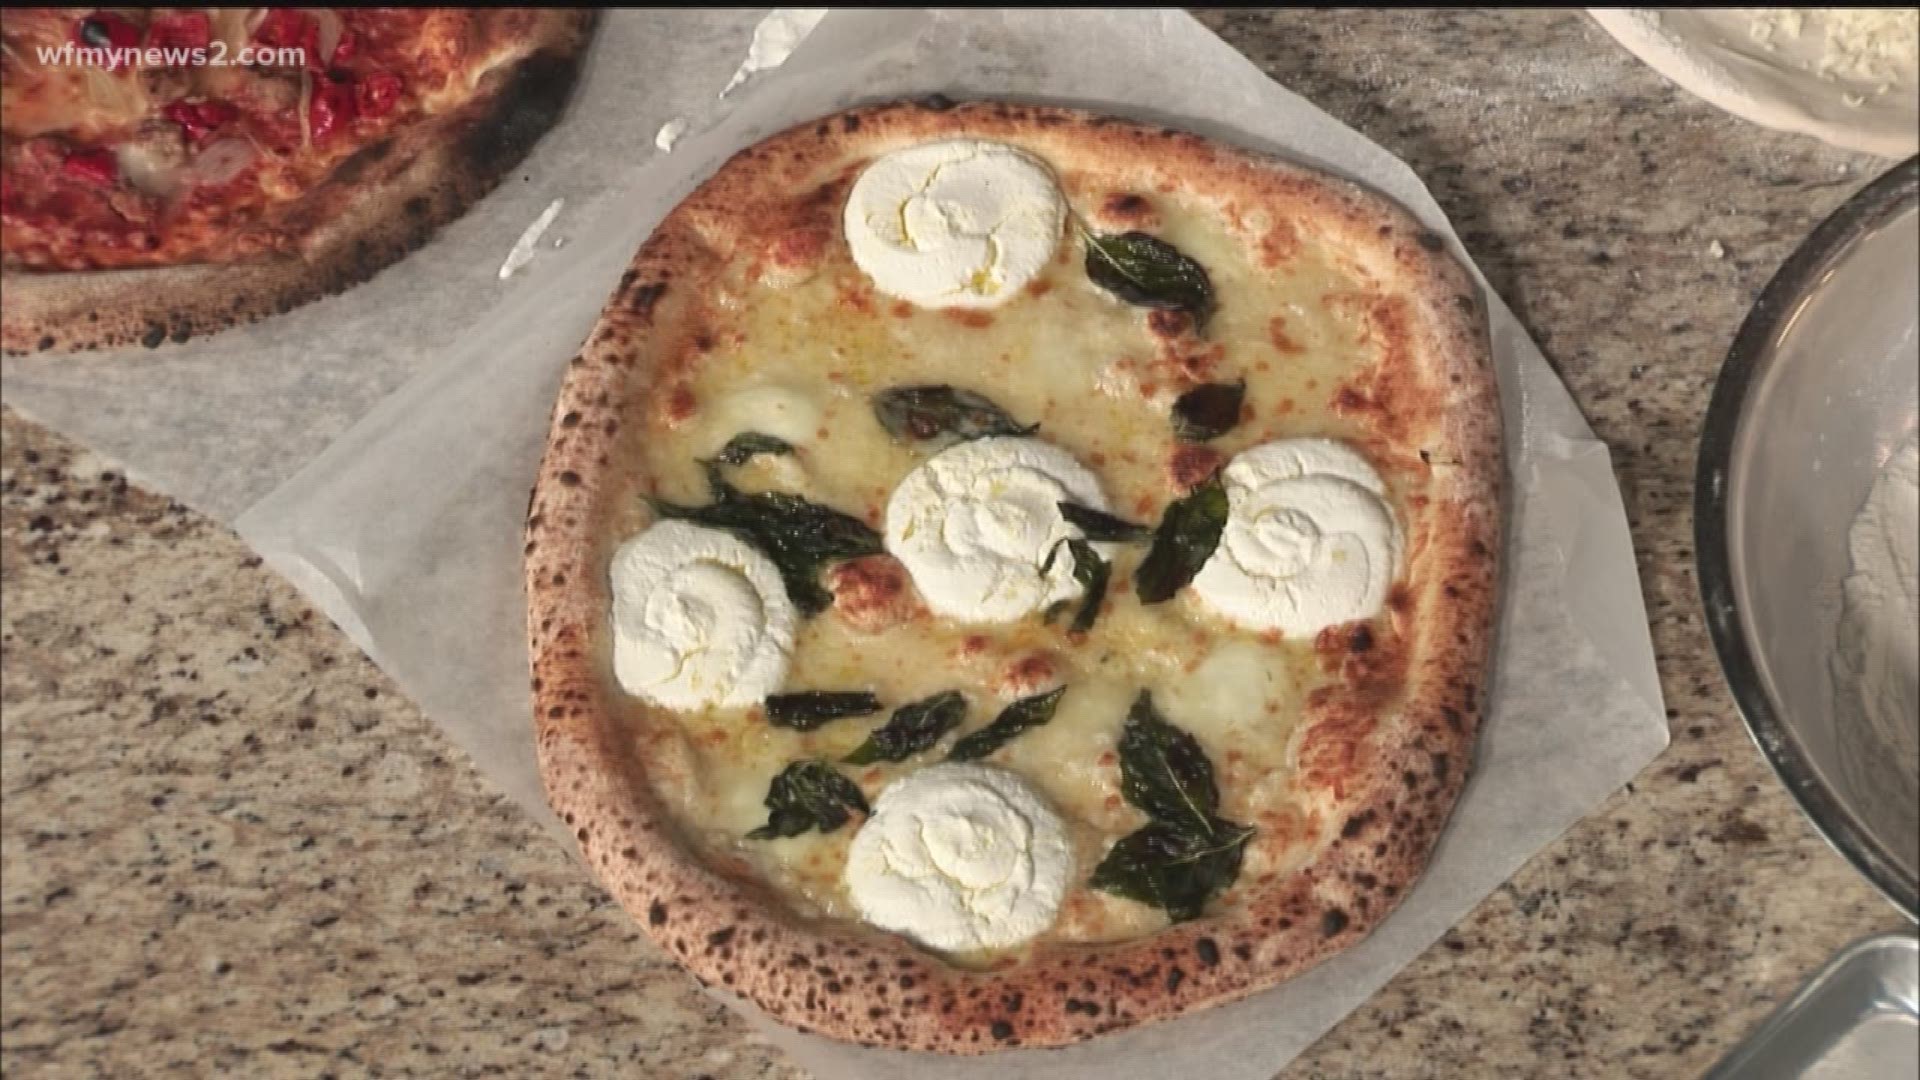 Cugino Forno shares their recipe for their "white" pizza.